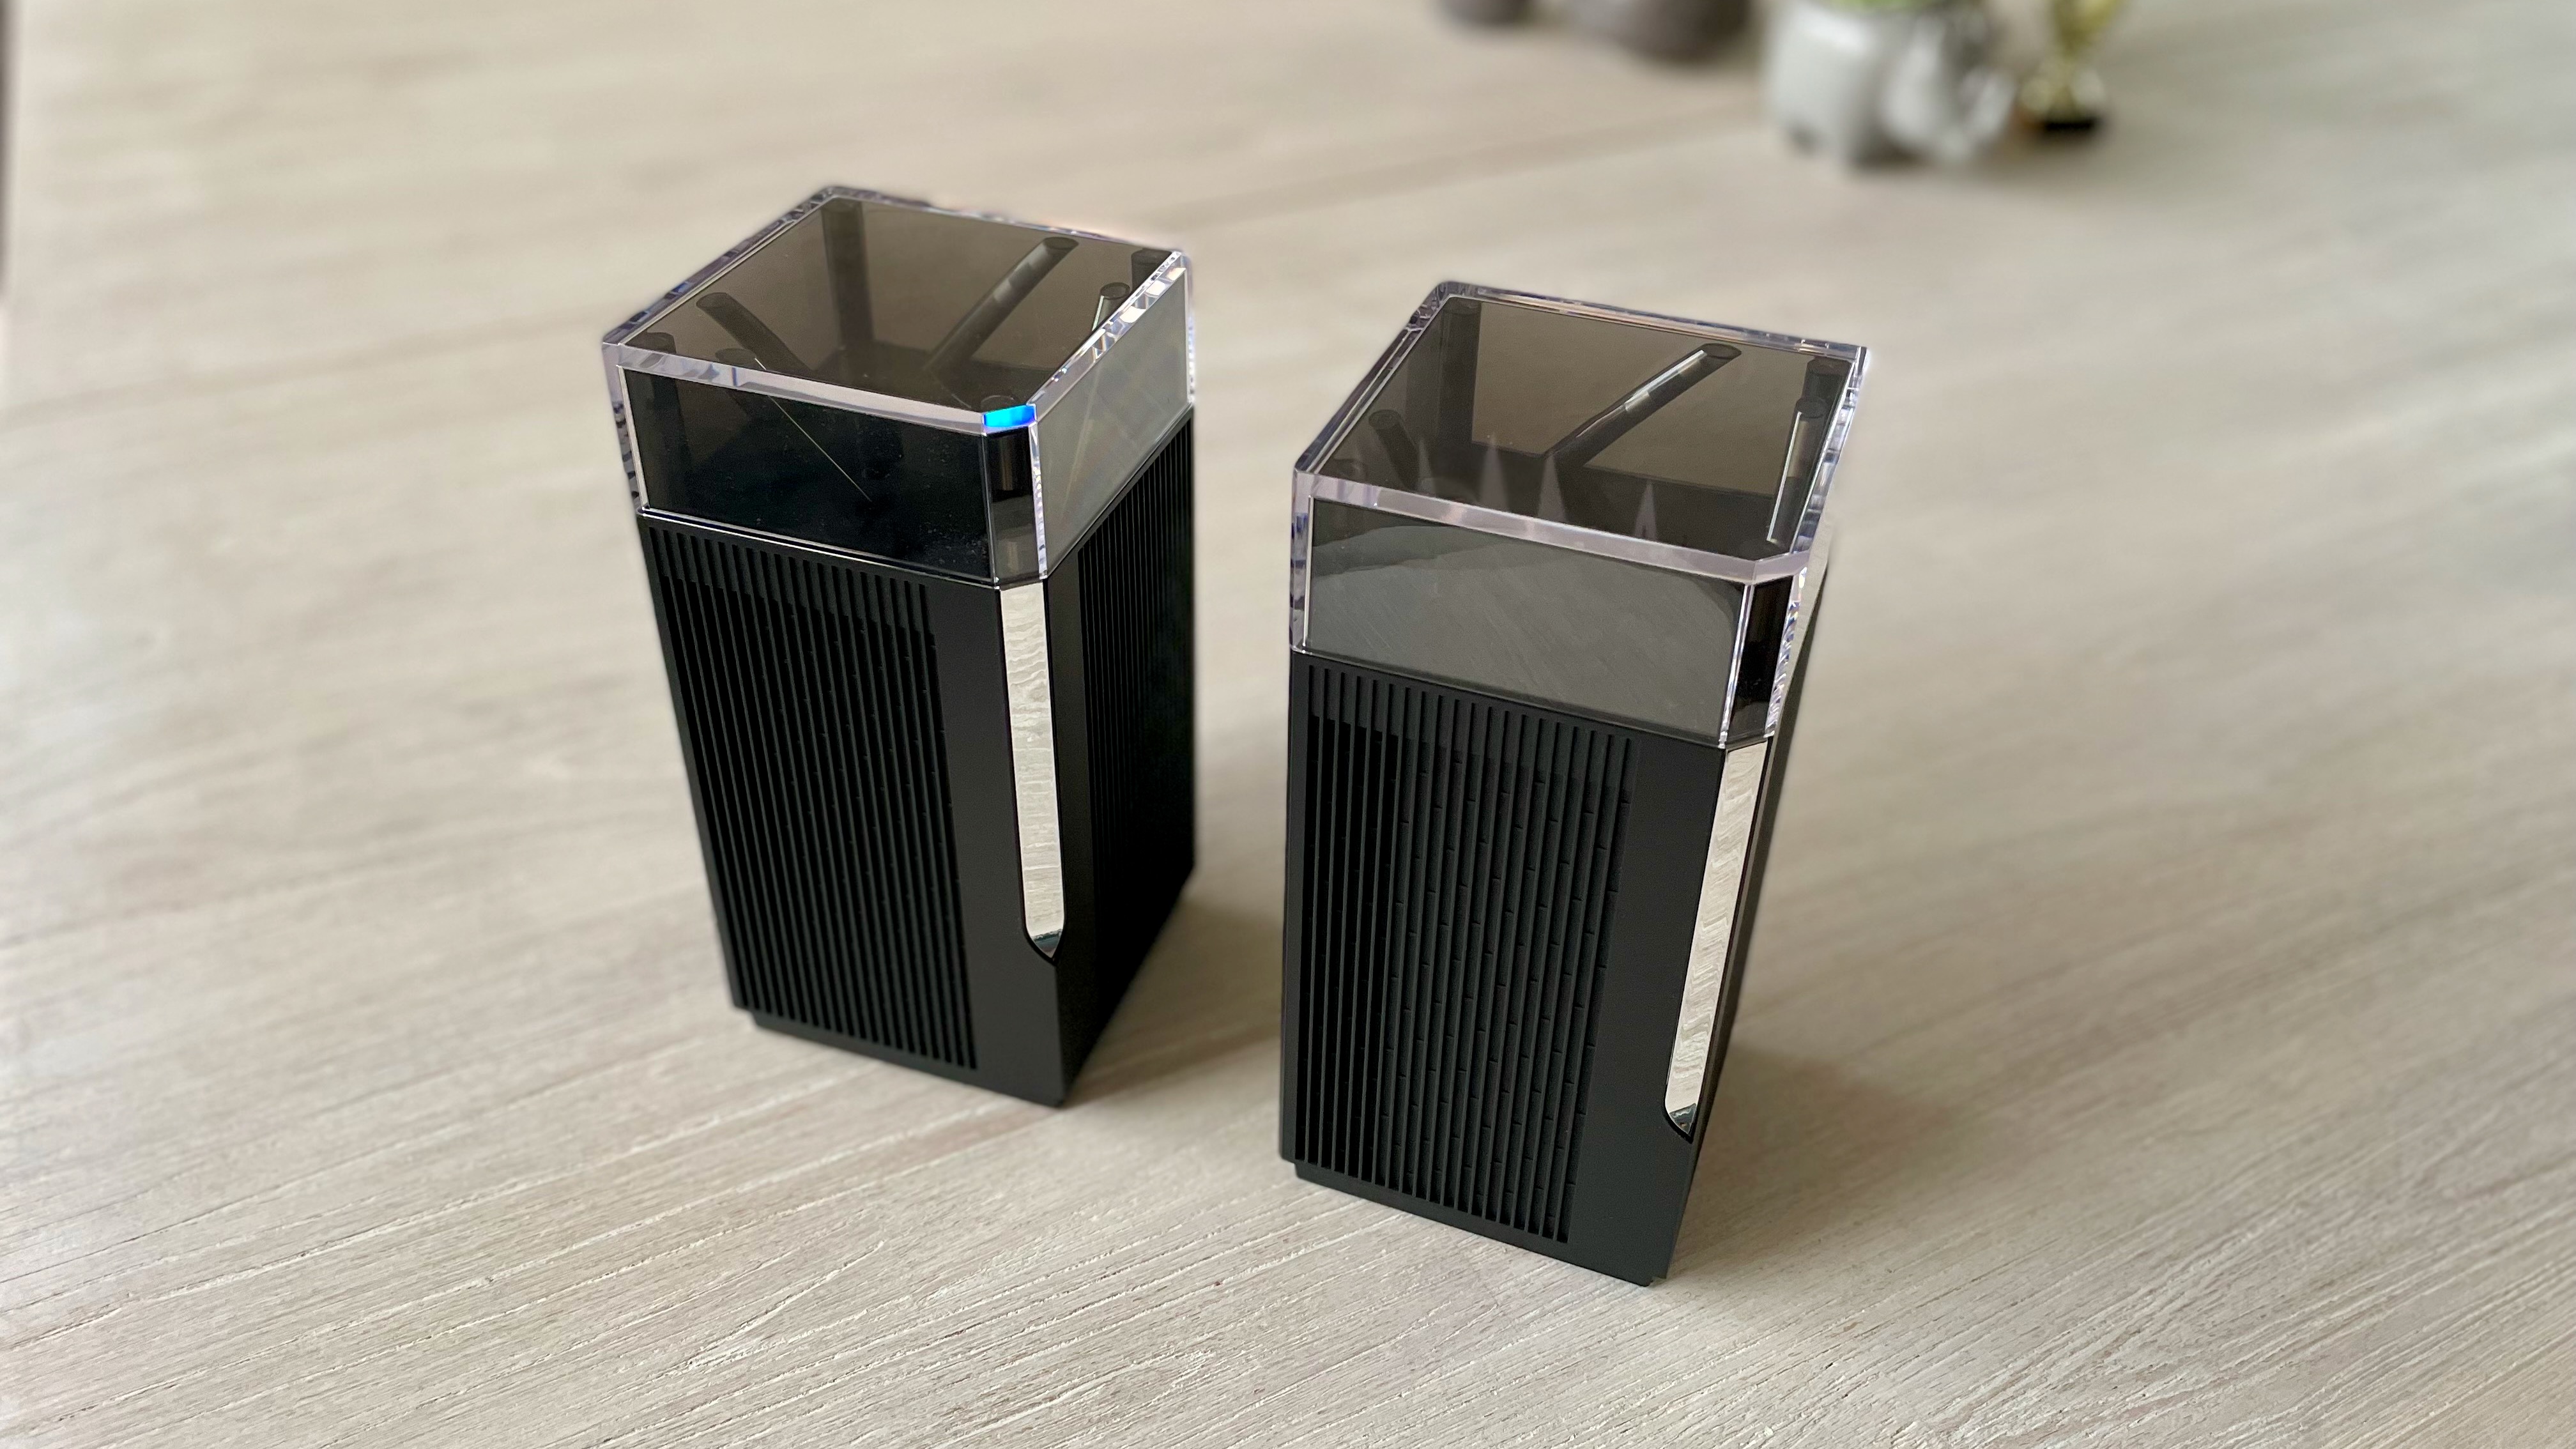 The twin towers of the Asus ZenWiFi Pro XT12 mesh router